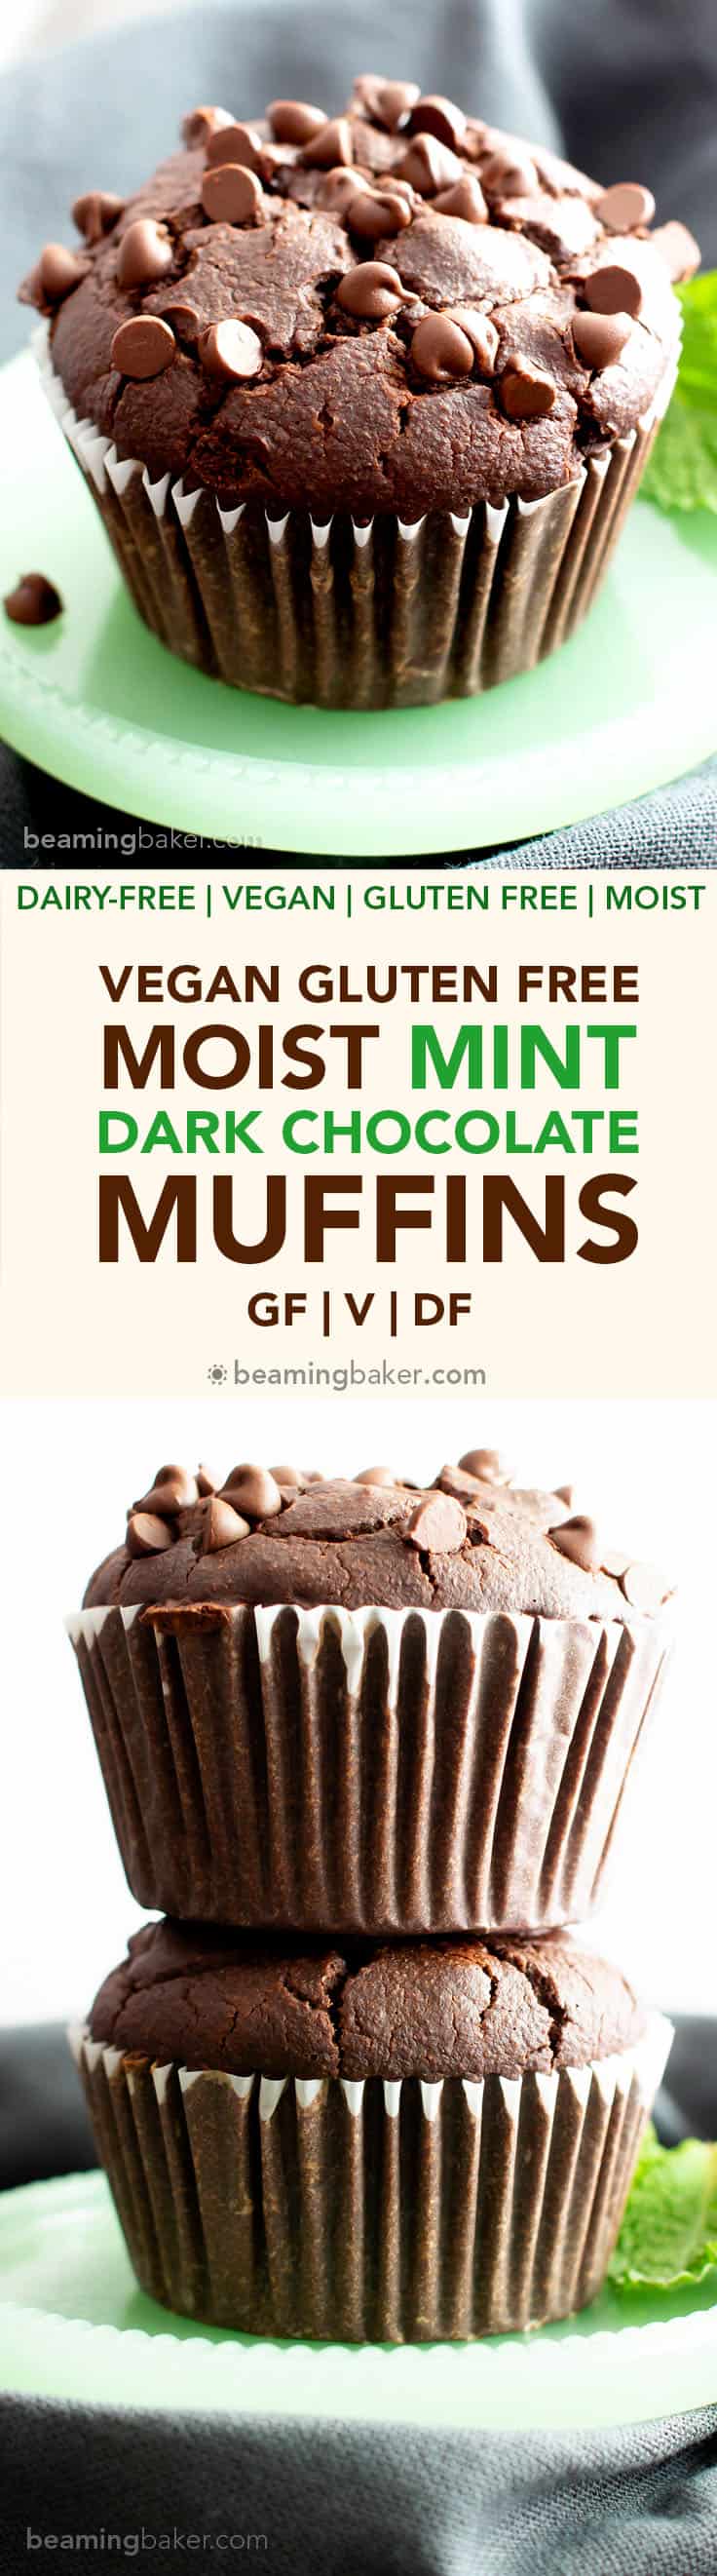 Gluten Free Moist Mint Dark Chocolate Chip Muffins (V, GF): an easy recipe for deliciously moist ‘n rich vegan dark chocolate mint muffins bursting with festive peppermint flavors & melty chocolate chips! Made with healthy ingredients. #HealthyBaking #Vegan #VeganGlutenFree #VeganBaking #Christmas #BeamingBaker #VeganChristmas #DarkChocolate #HealthyDesserts #MintChocolate | Recipe at BeamingBaker.com